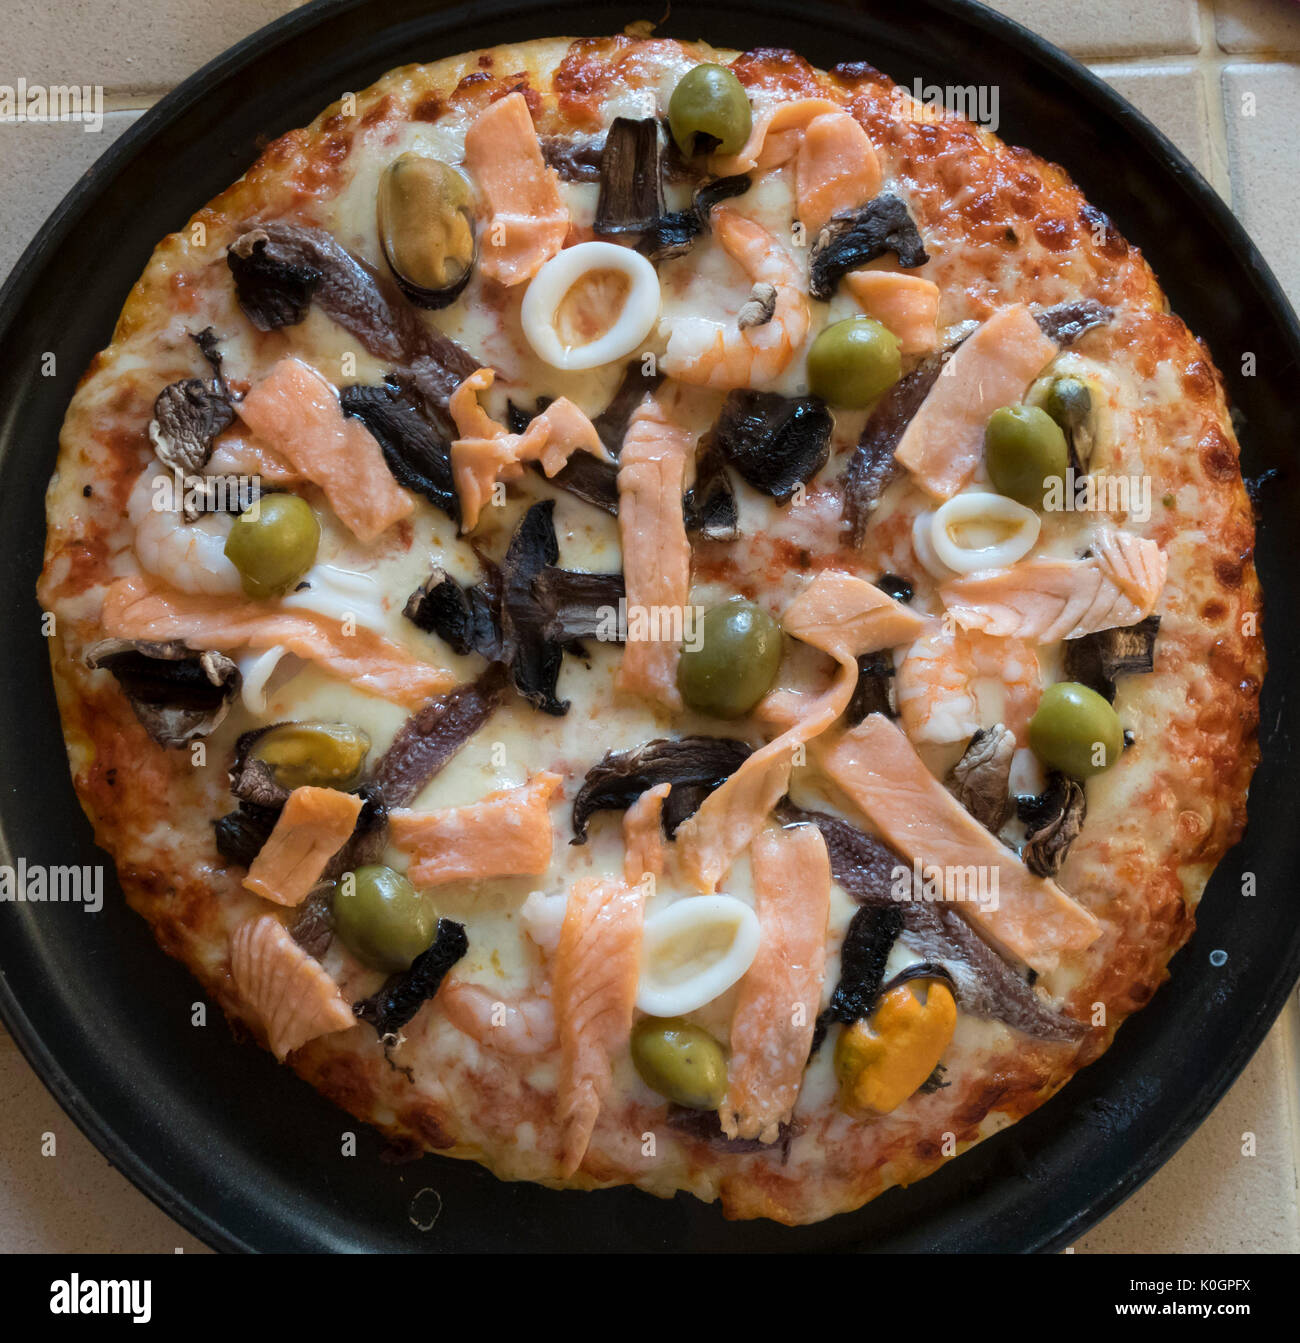 Seafood pizza with salmon, prawns, squid rings, olives Stock Photo